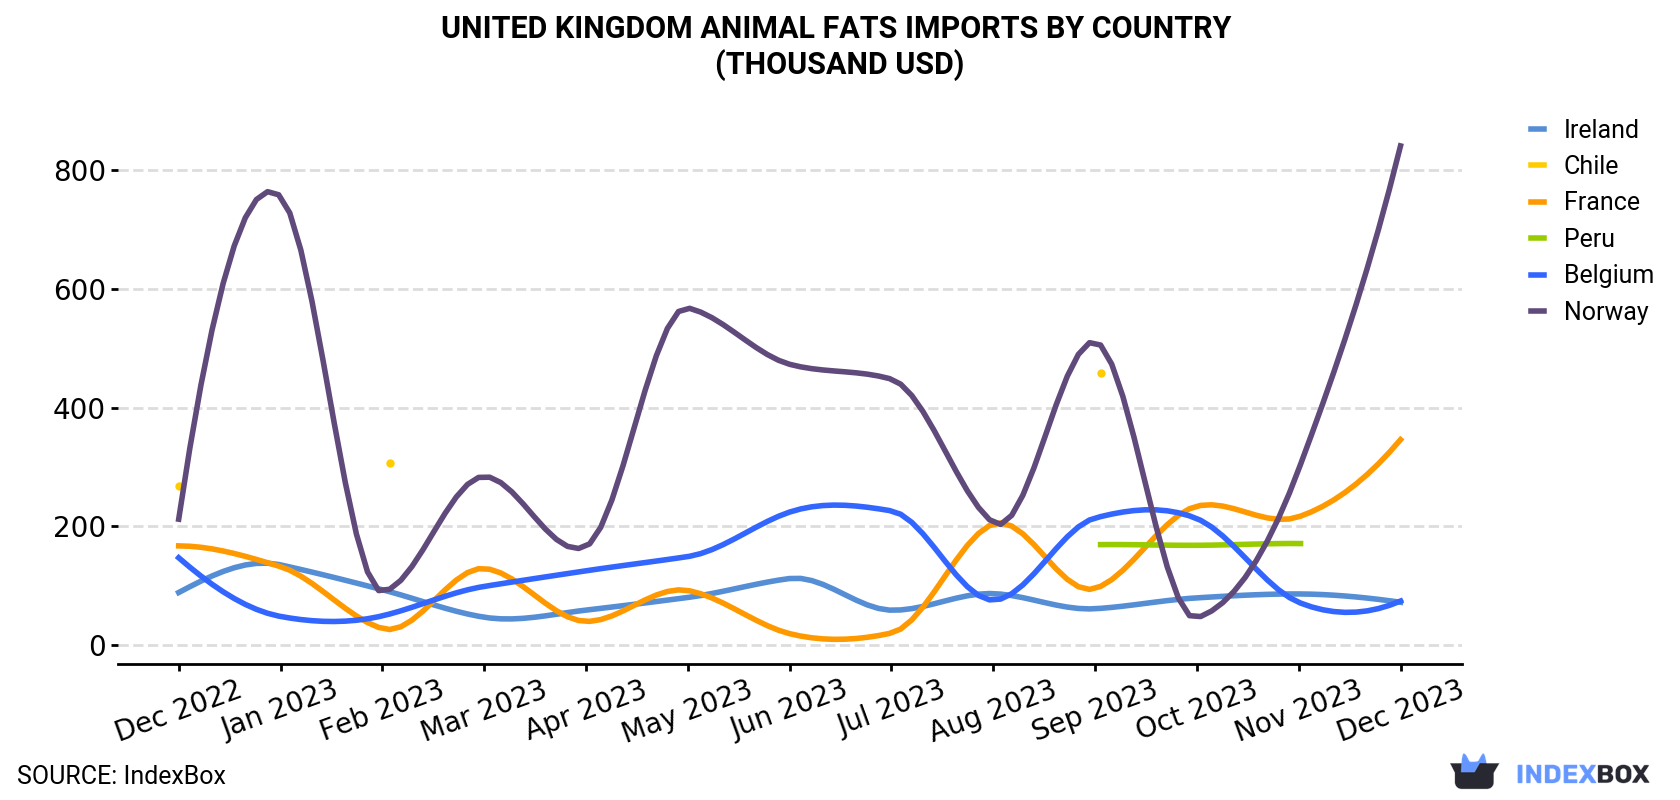 United Kingdom Animal Fats Imports By Country (Thousand USD)